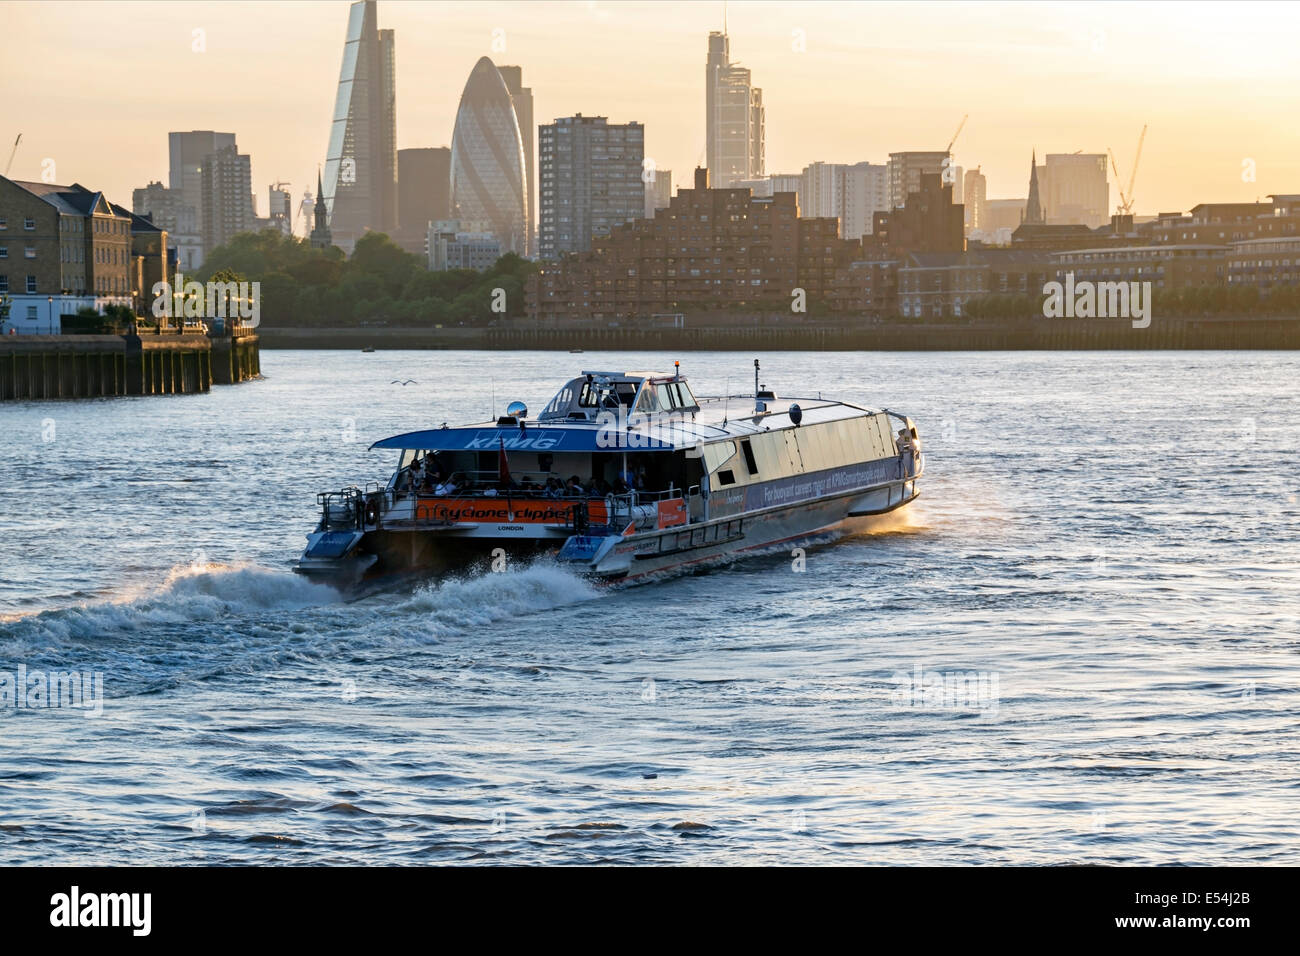 Thames Clipper River Bus With City of London Skyline in the Background, London, UK Stock Photo